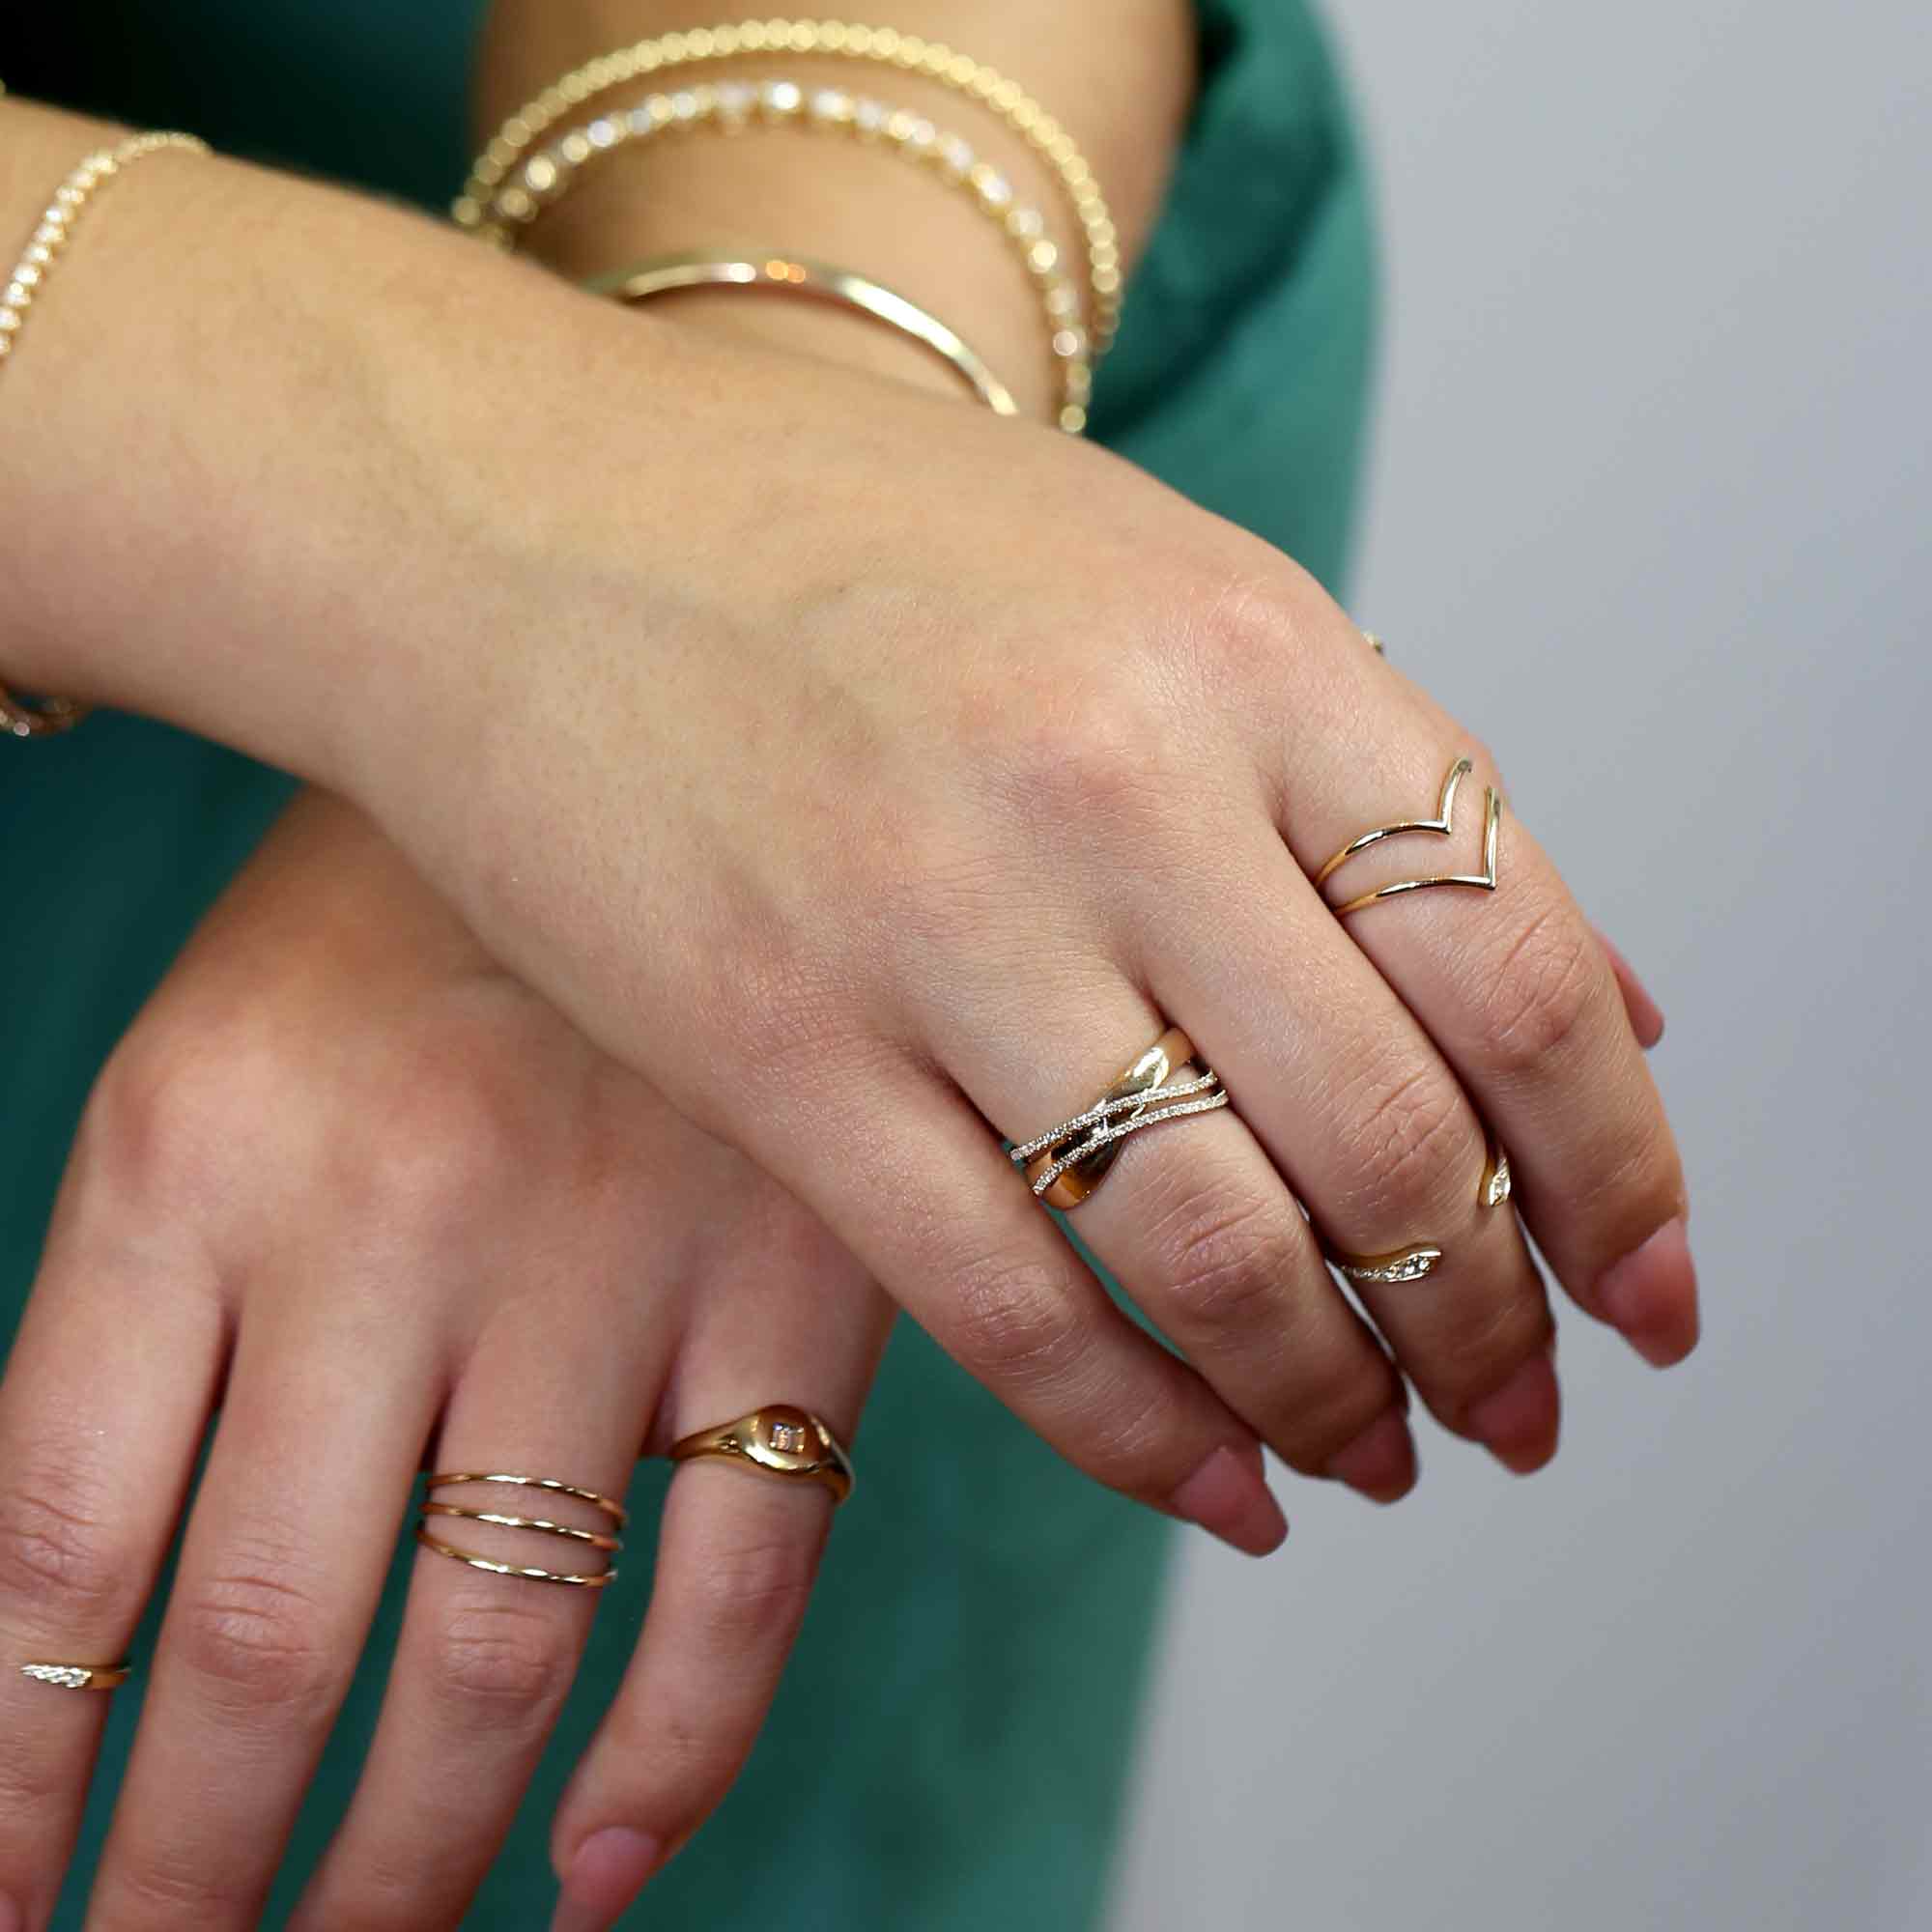 Hands wearing stackable rings on fingers